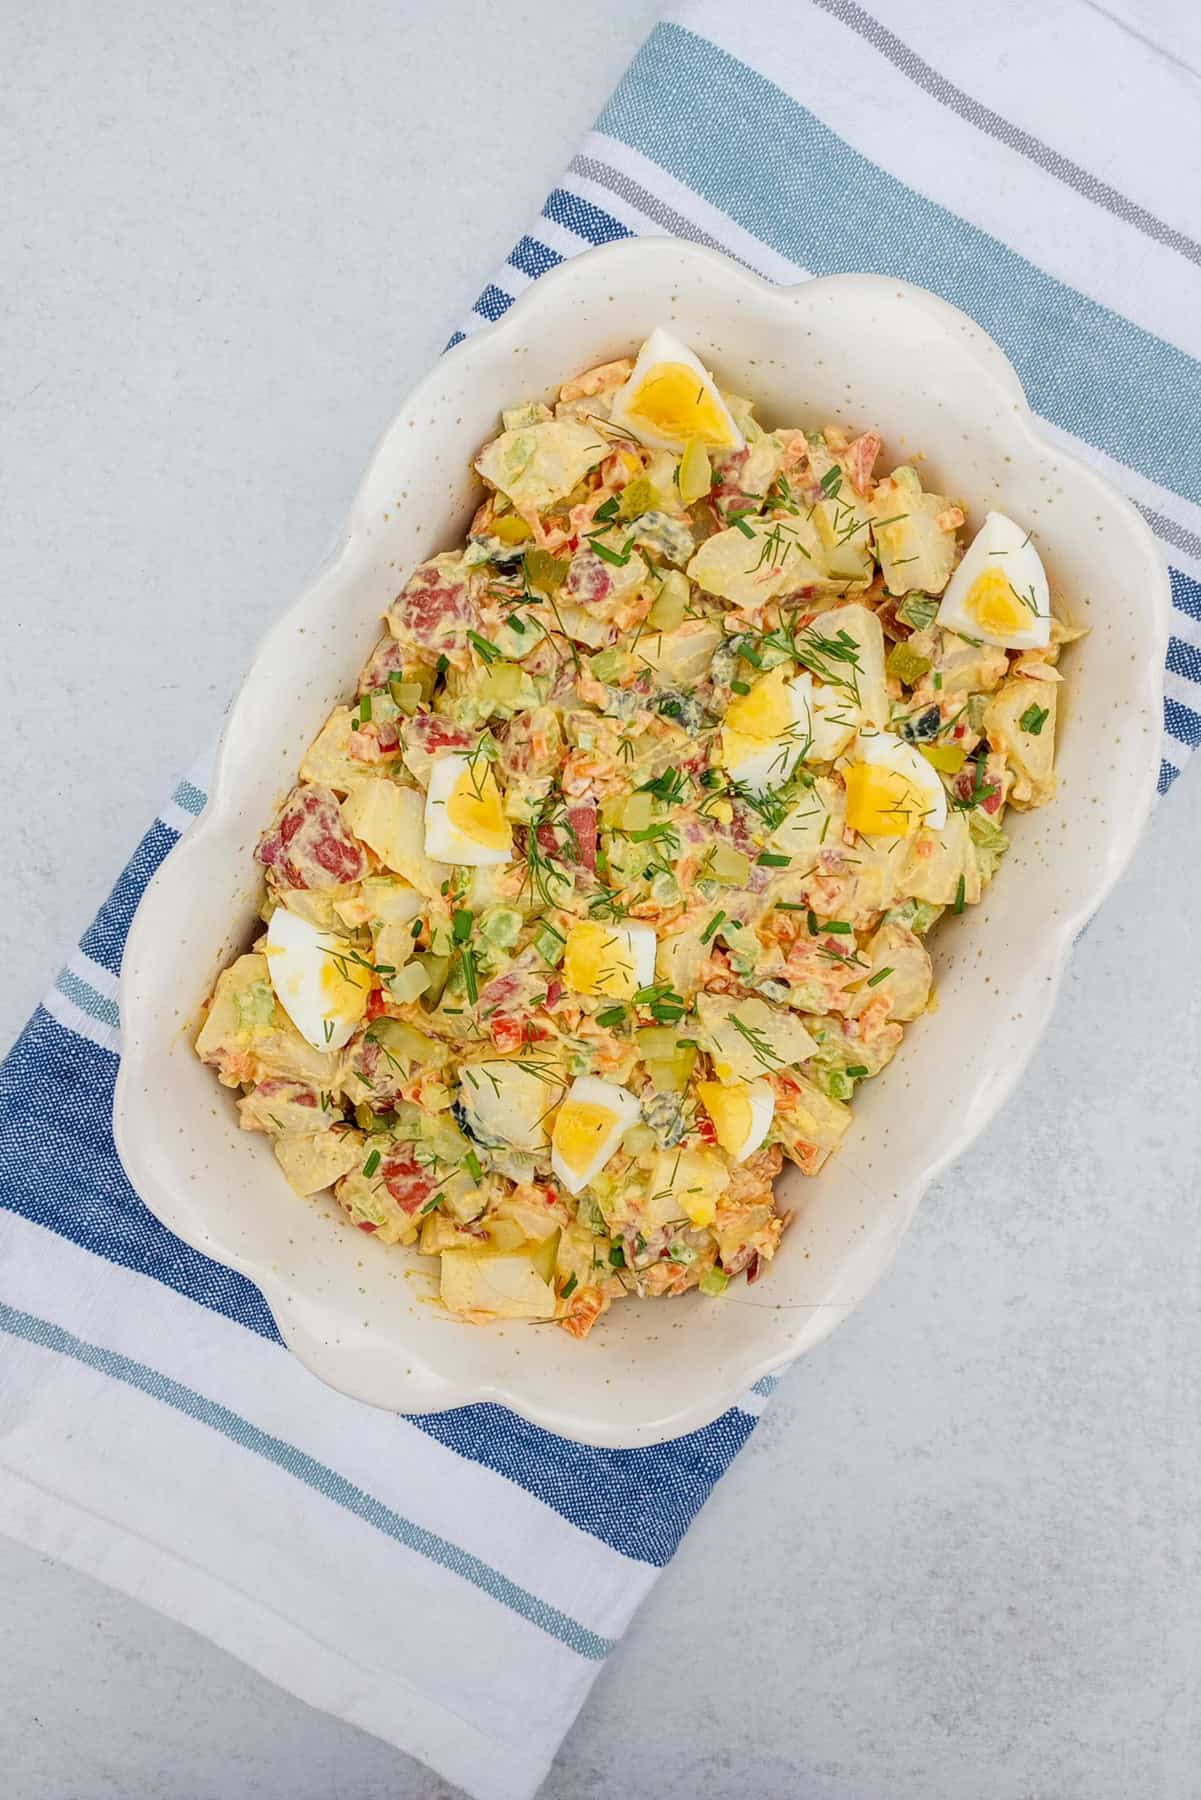 Red potato salad without mayonnaise in a serving dish.